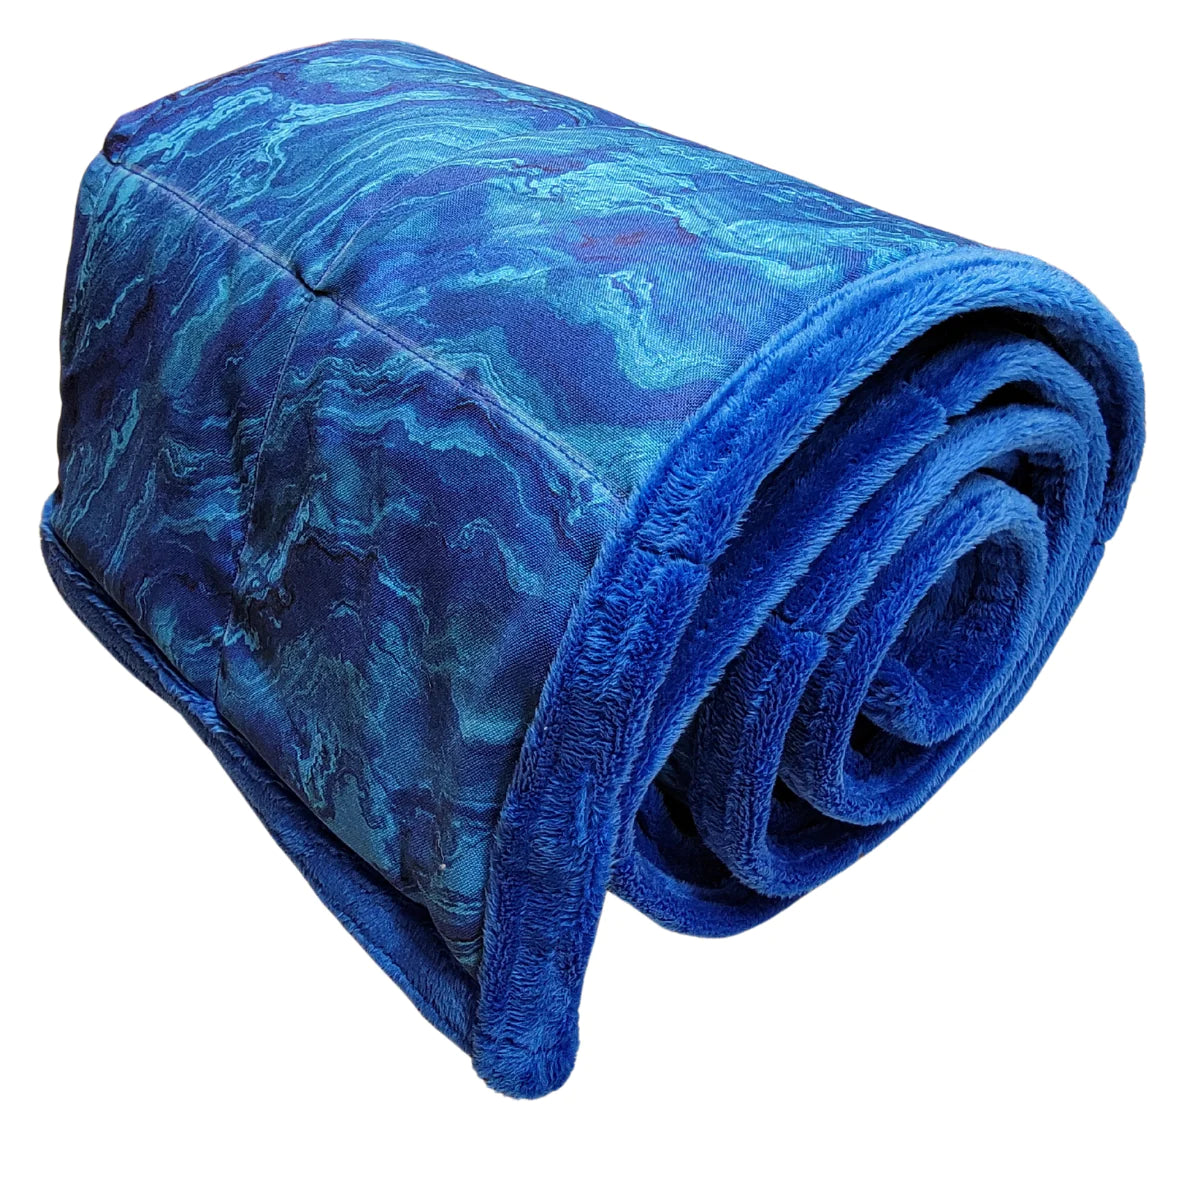 Clearance Weighted Blanket - Travel 4 lb Ocean Wave Fabric with Matching Pillow (for 40 lb user)